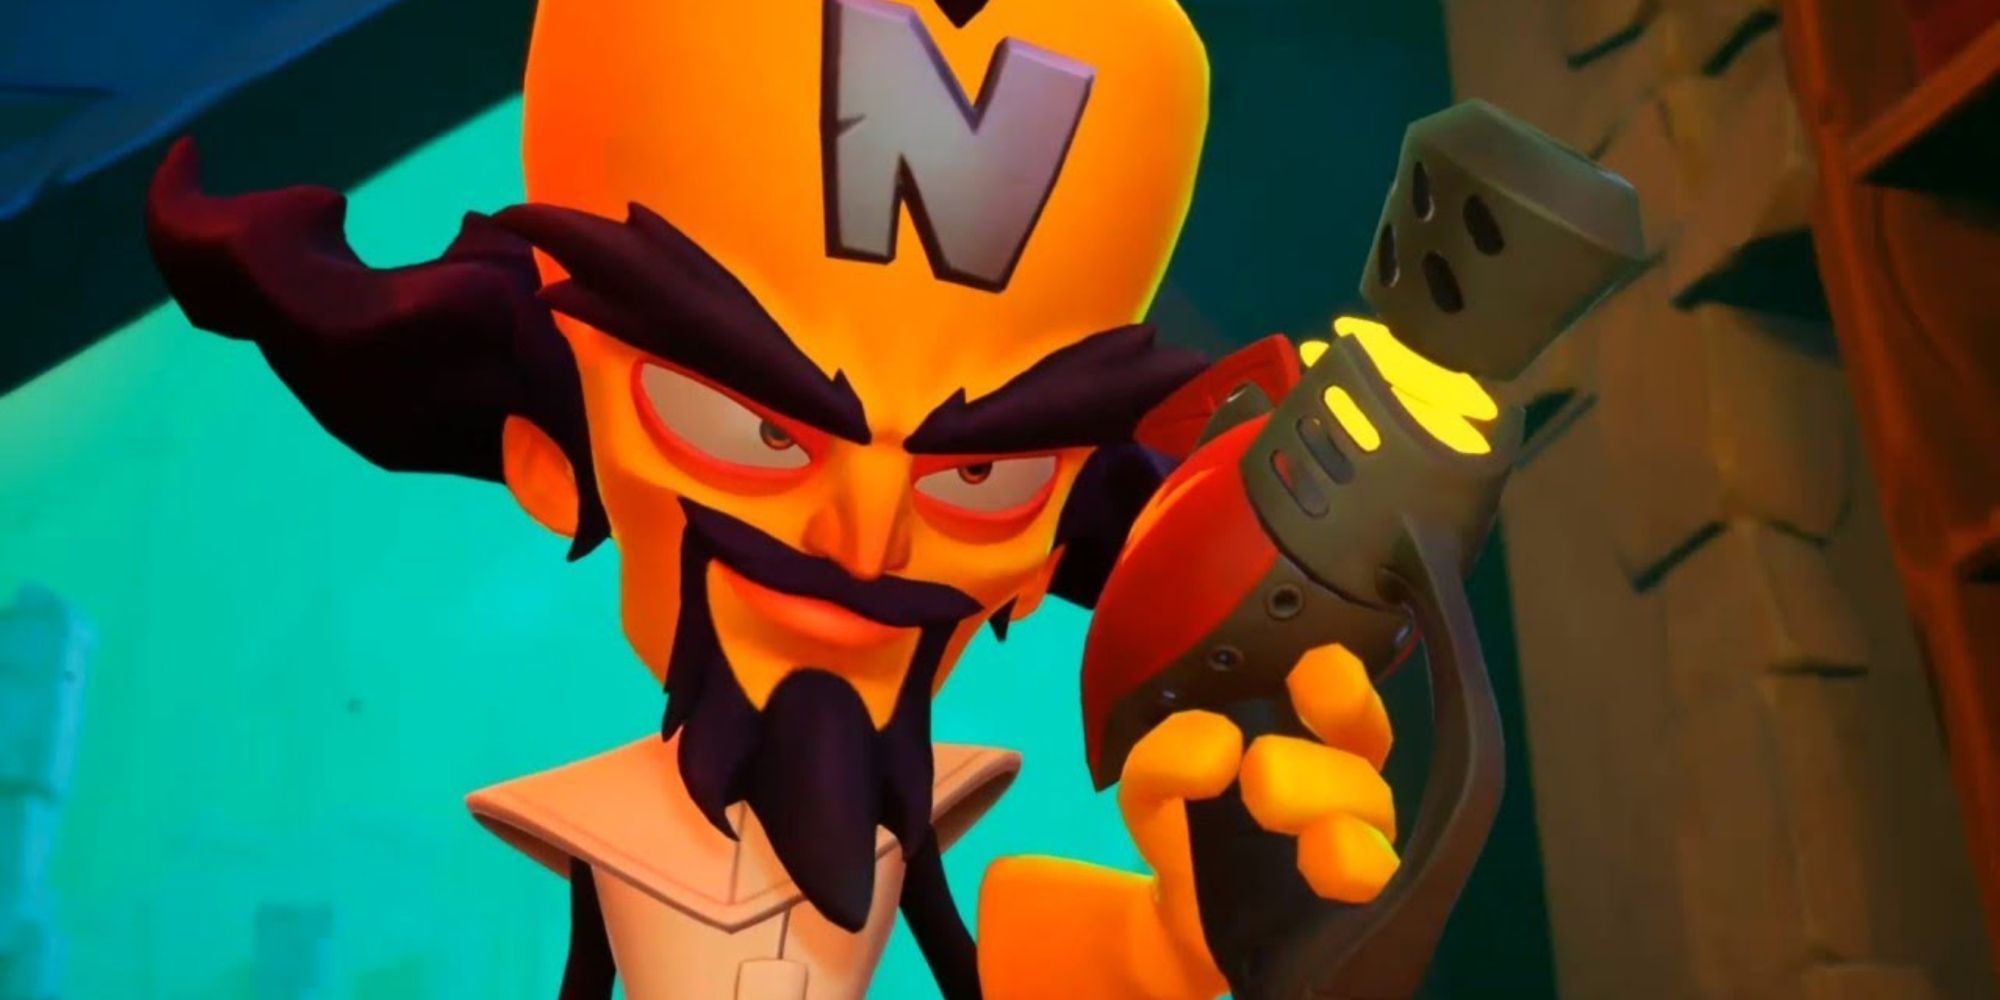 Neo Cortex Holding His Blaster While Making A Smug Face